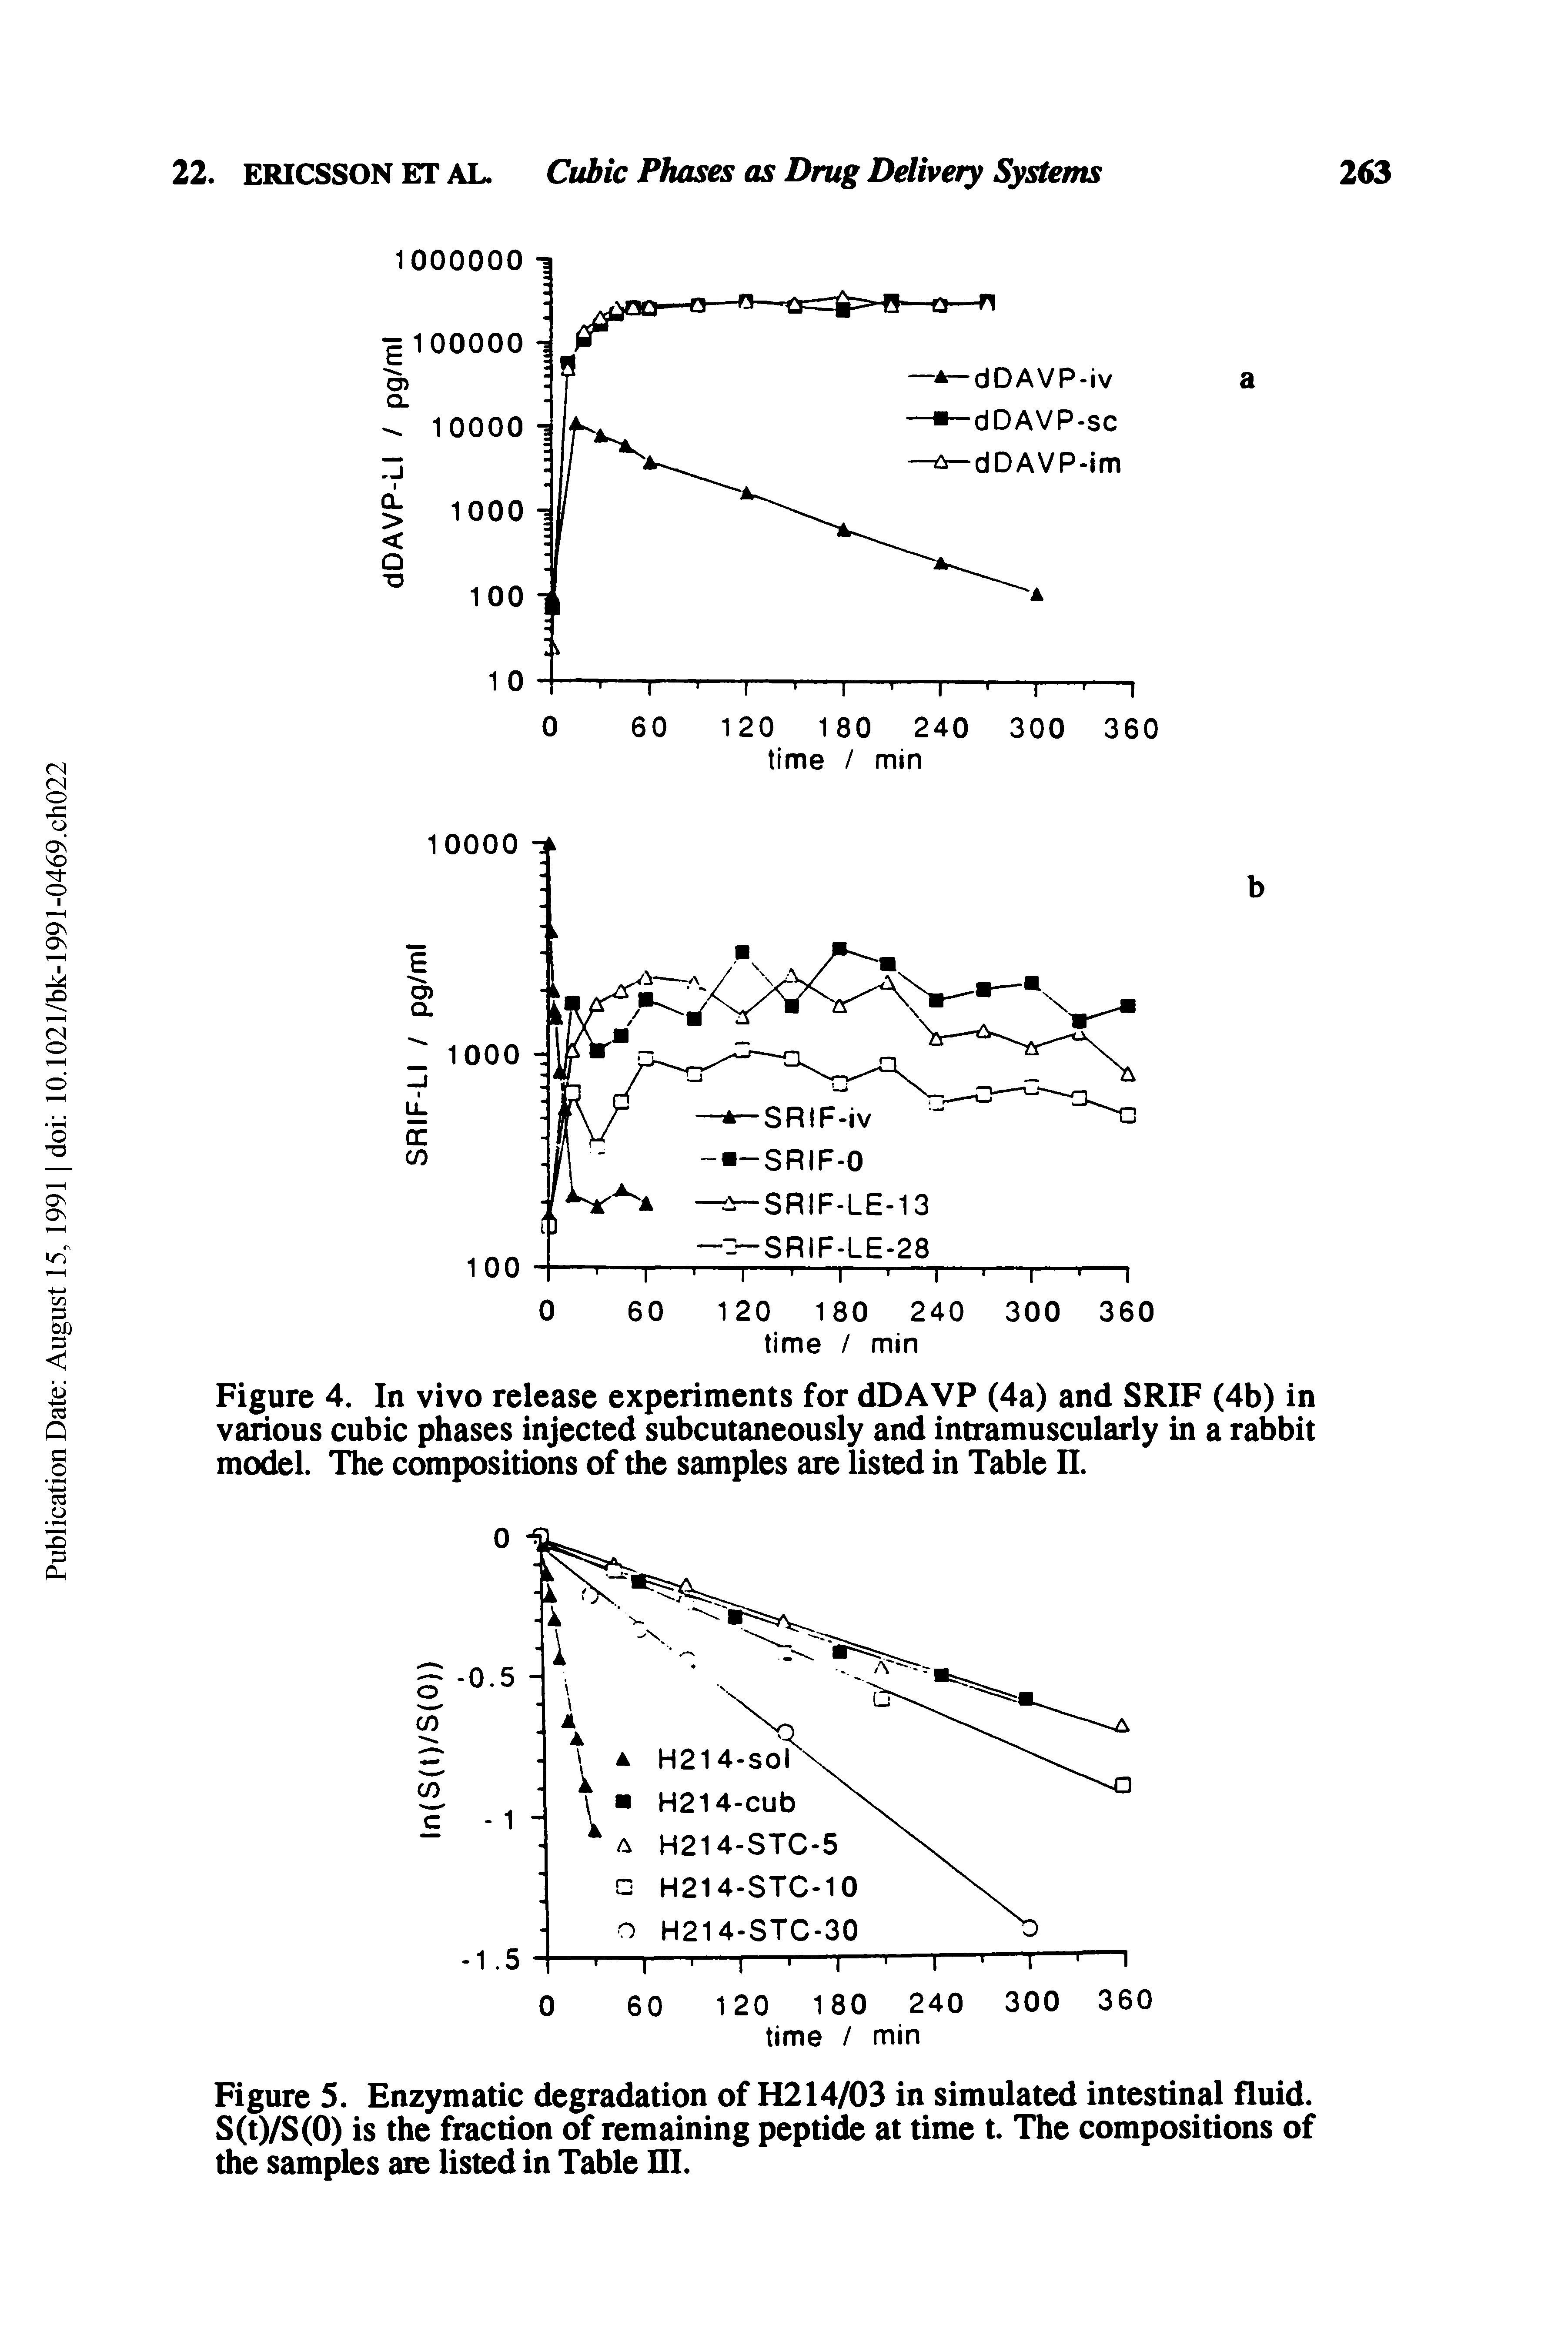 Figure 4. In vivo release experiments for dDAVP (4a) and SRIF (4b) in various cubic phases injected subcutaneously and intramuscularly in a rabbit model. The compositions of the samples are listed in Table n.